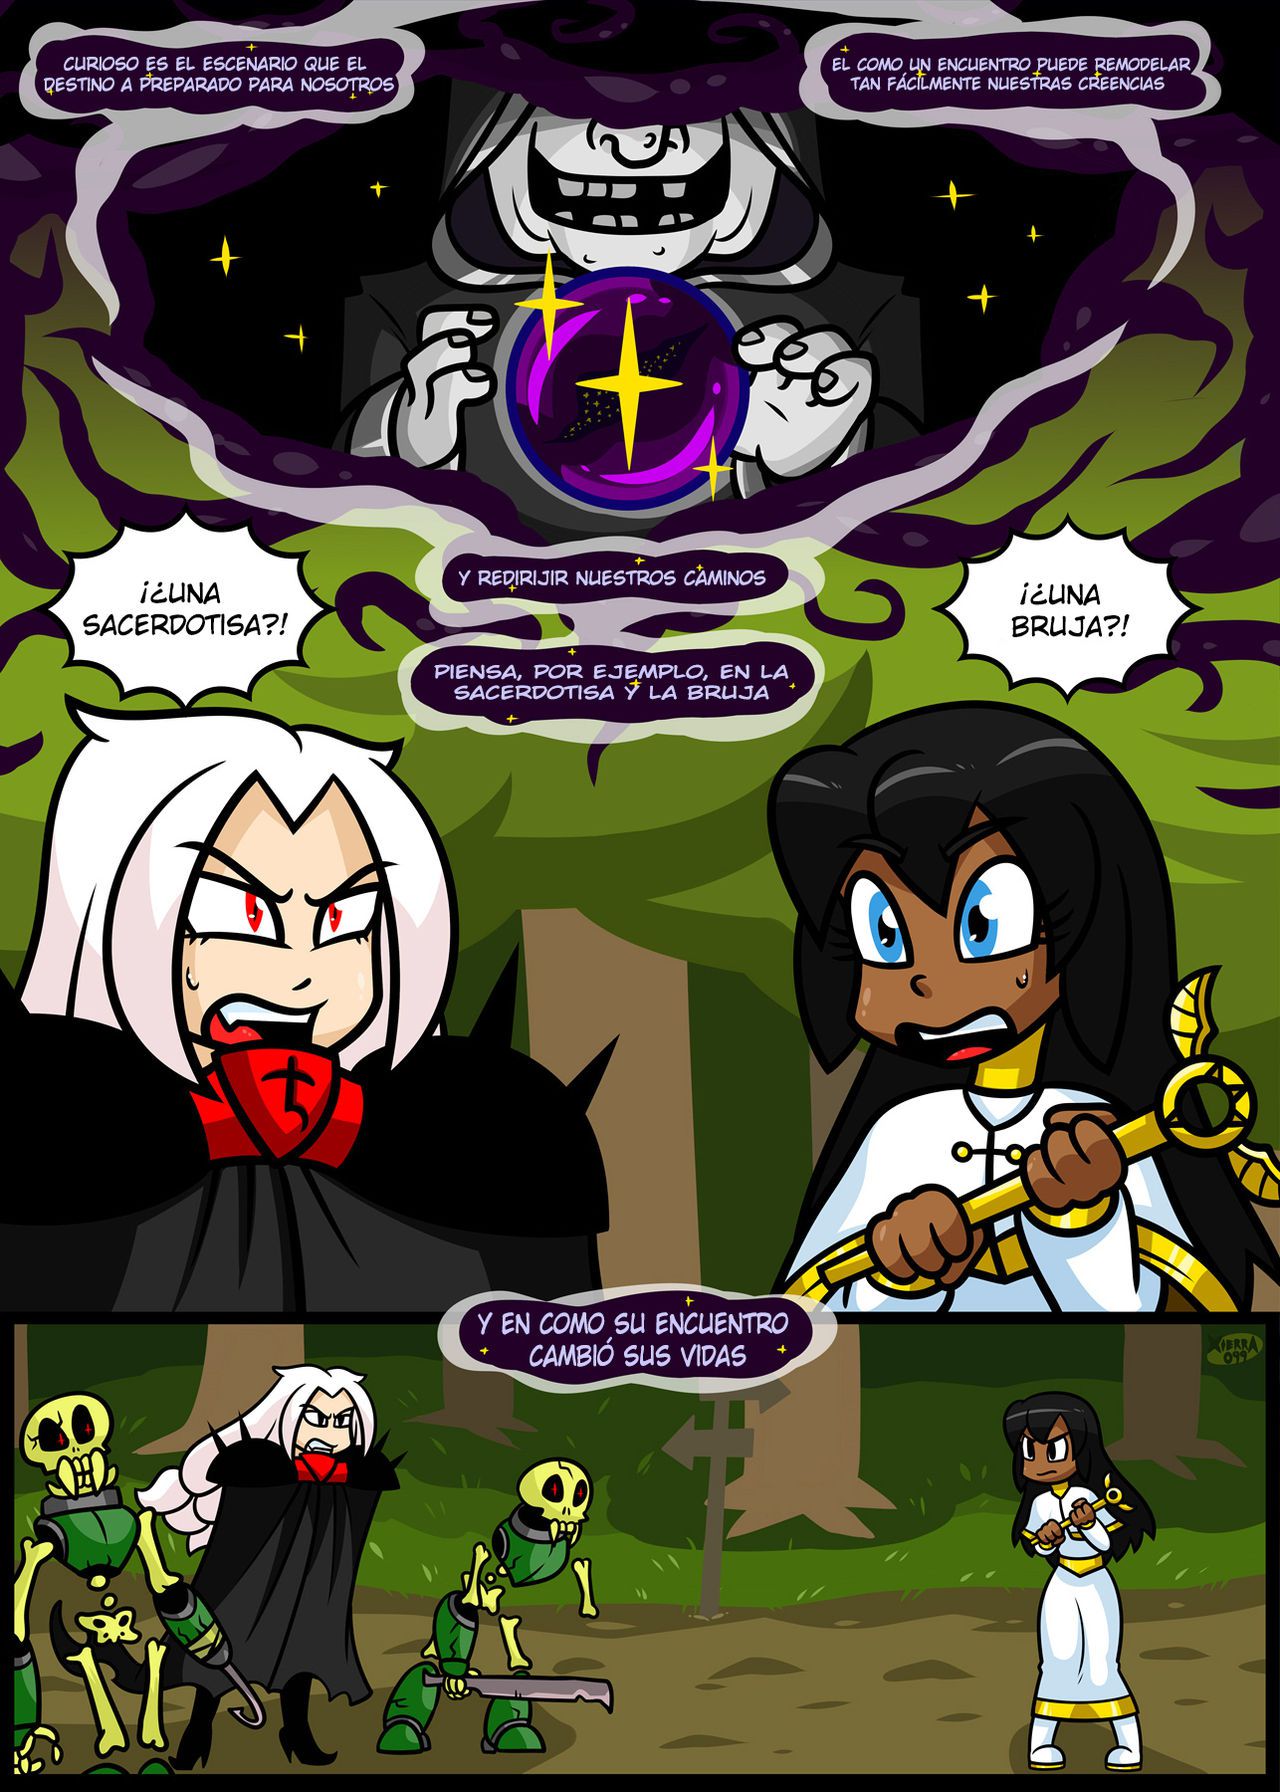 [Xierra099] Bright Darkness- The Priestess And The Witch (Ongoing) [Spanish] [RazorRain] 2